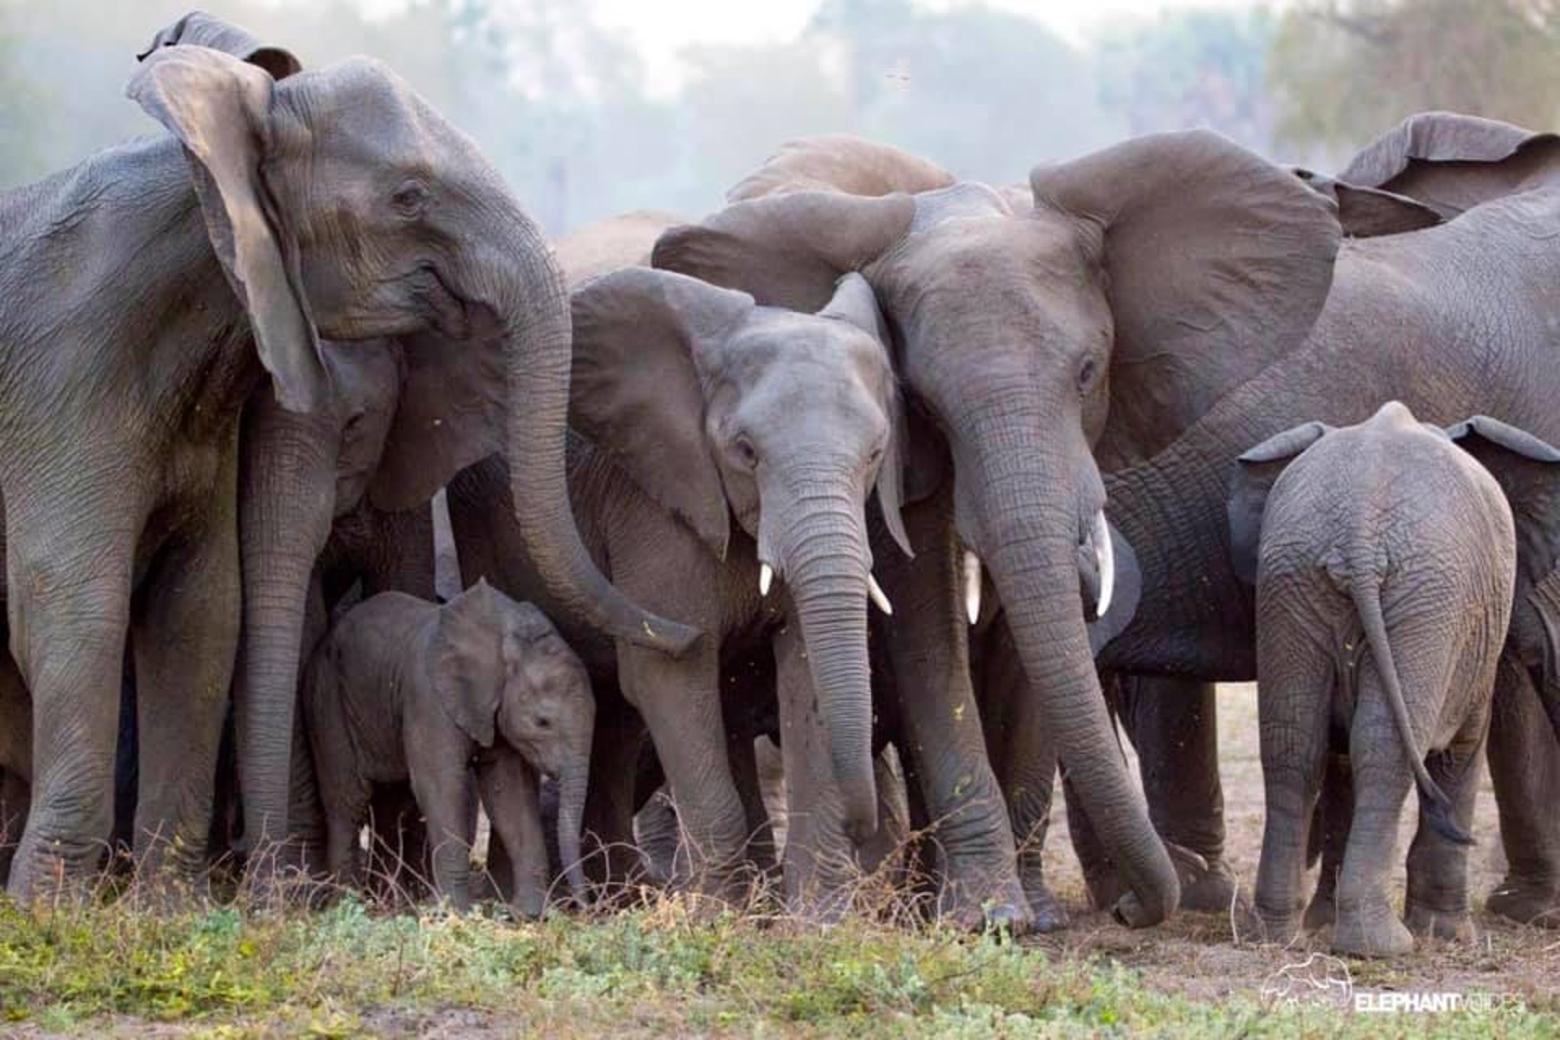 Once decimated by ivory poachers, meat hunters and casualties of armed civil unrest, elephants are re-inhabiting their former haunts. Photo courtesy Gorongosa National Park